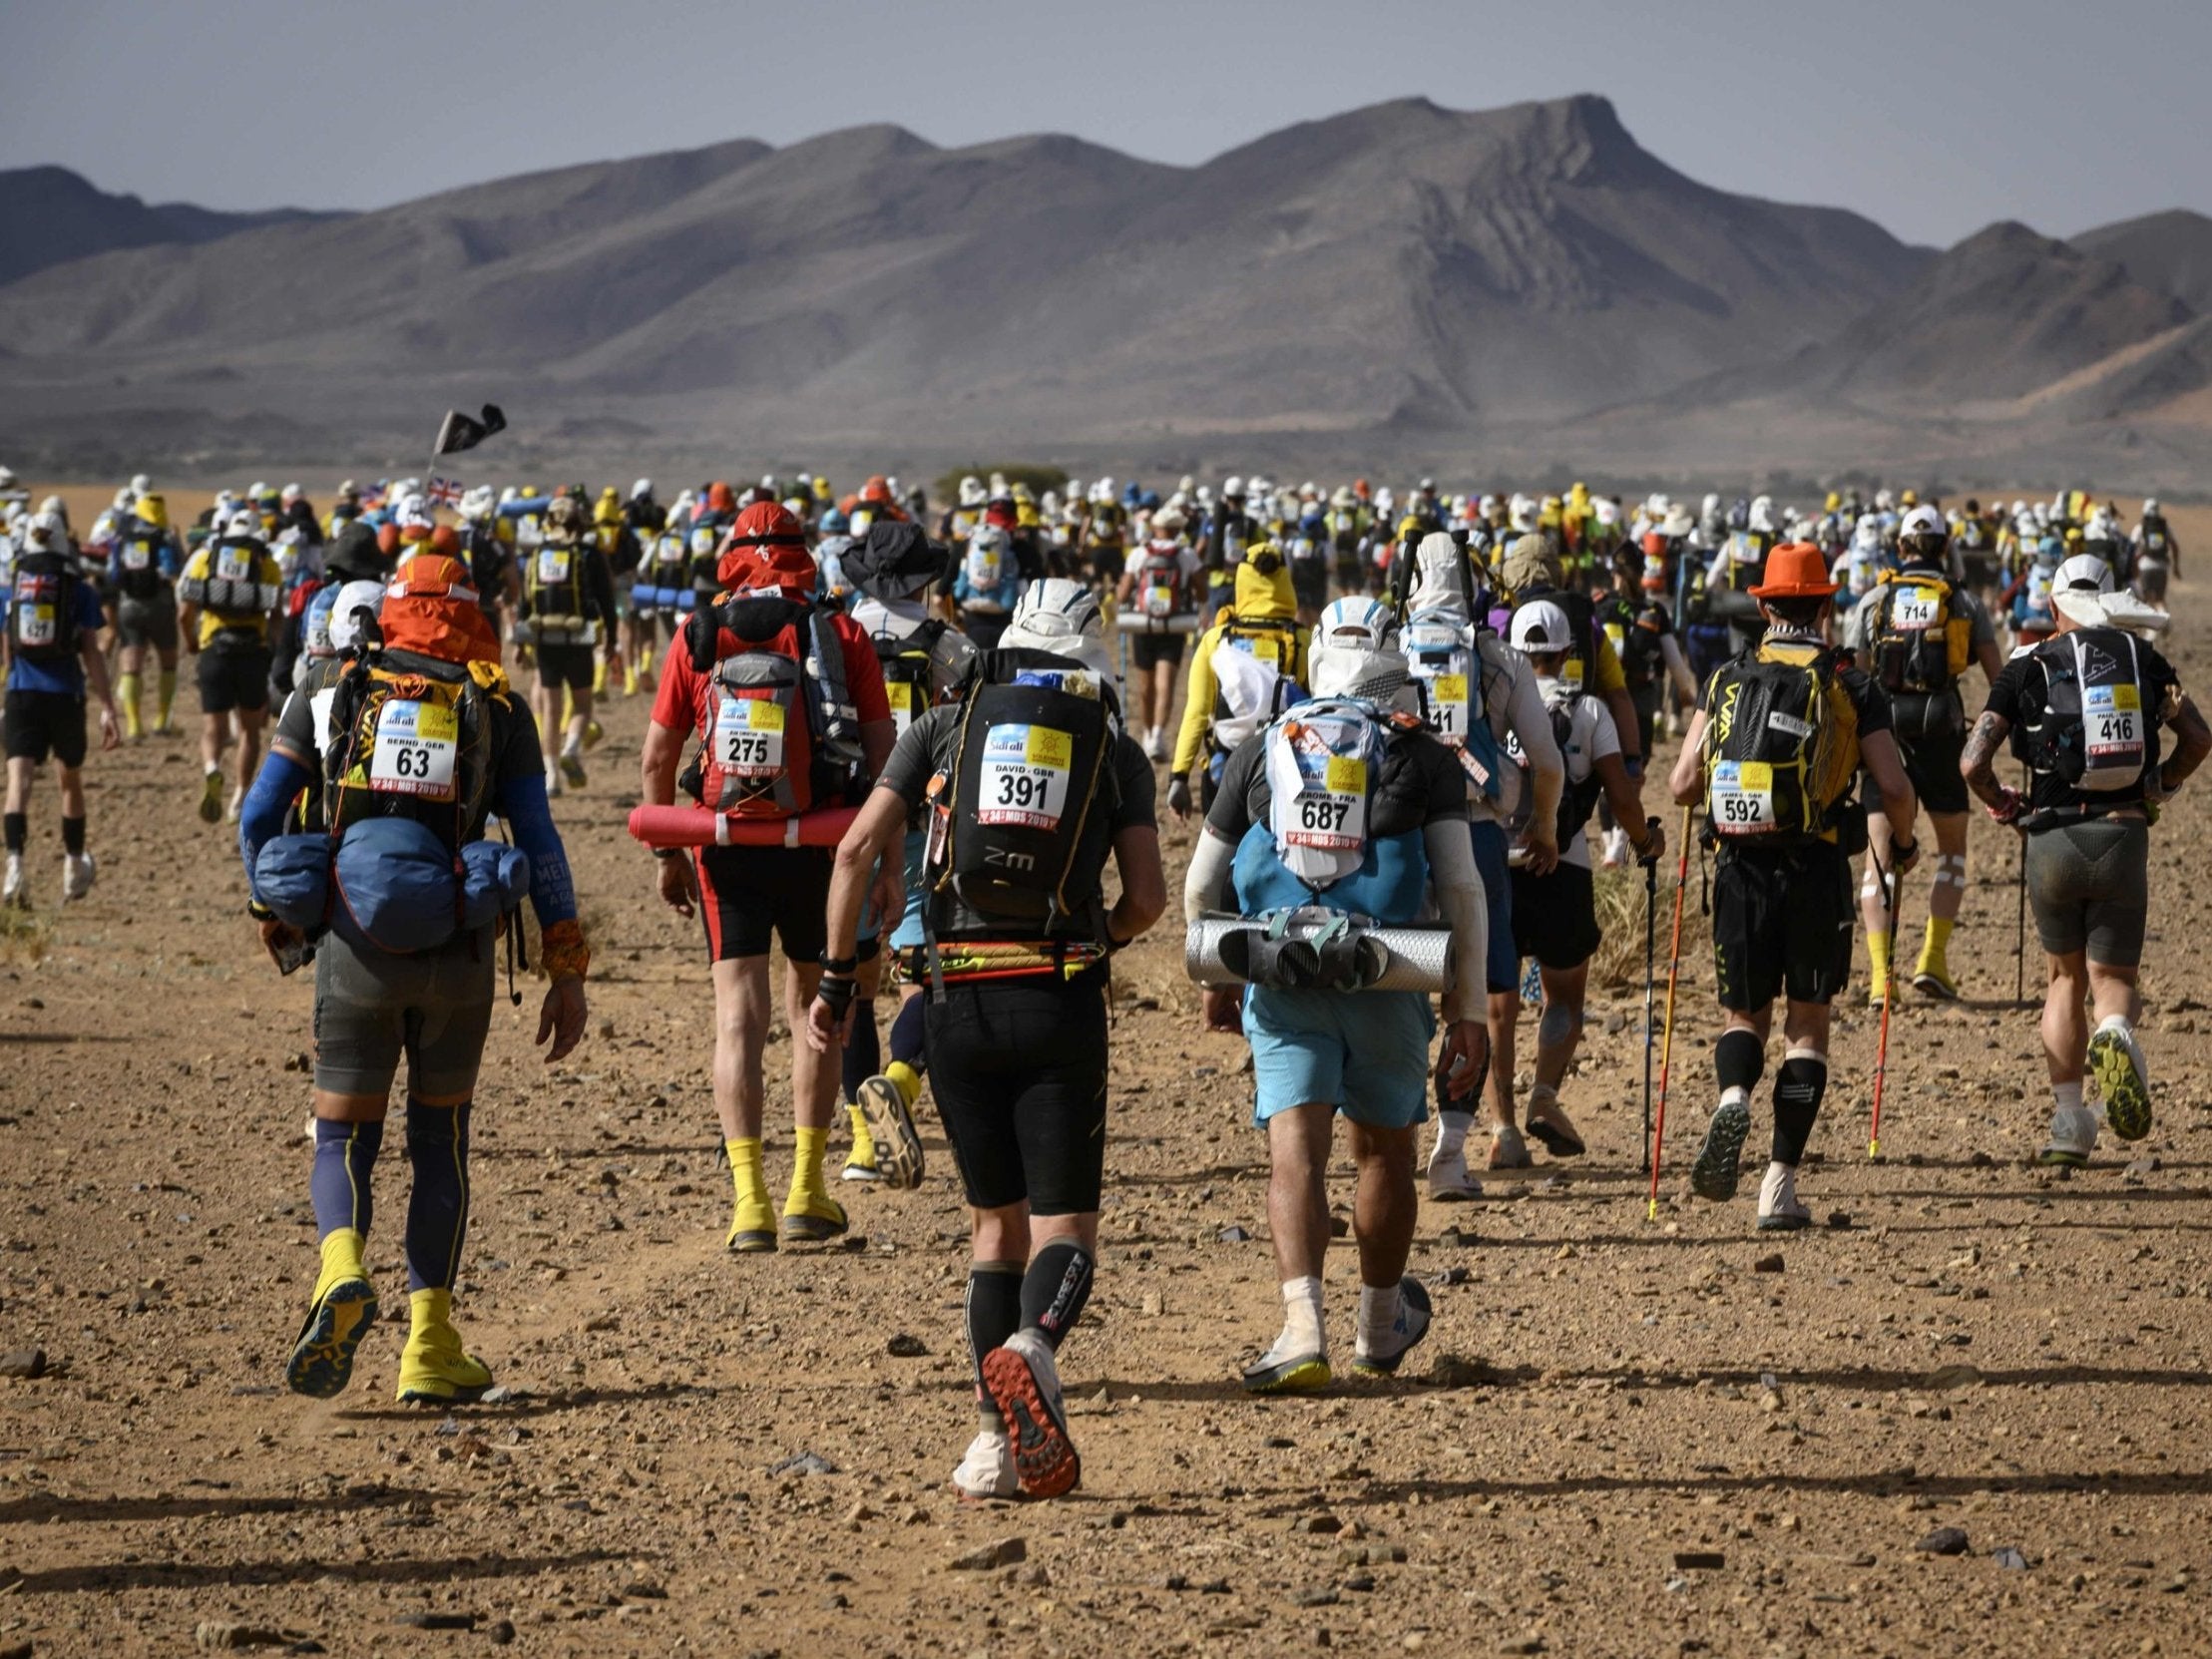 This year’s racers take on the Marathon des Sables – a fierce challenge in inhospitable conditions